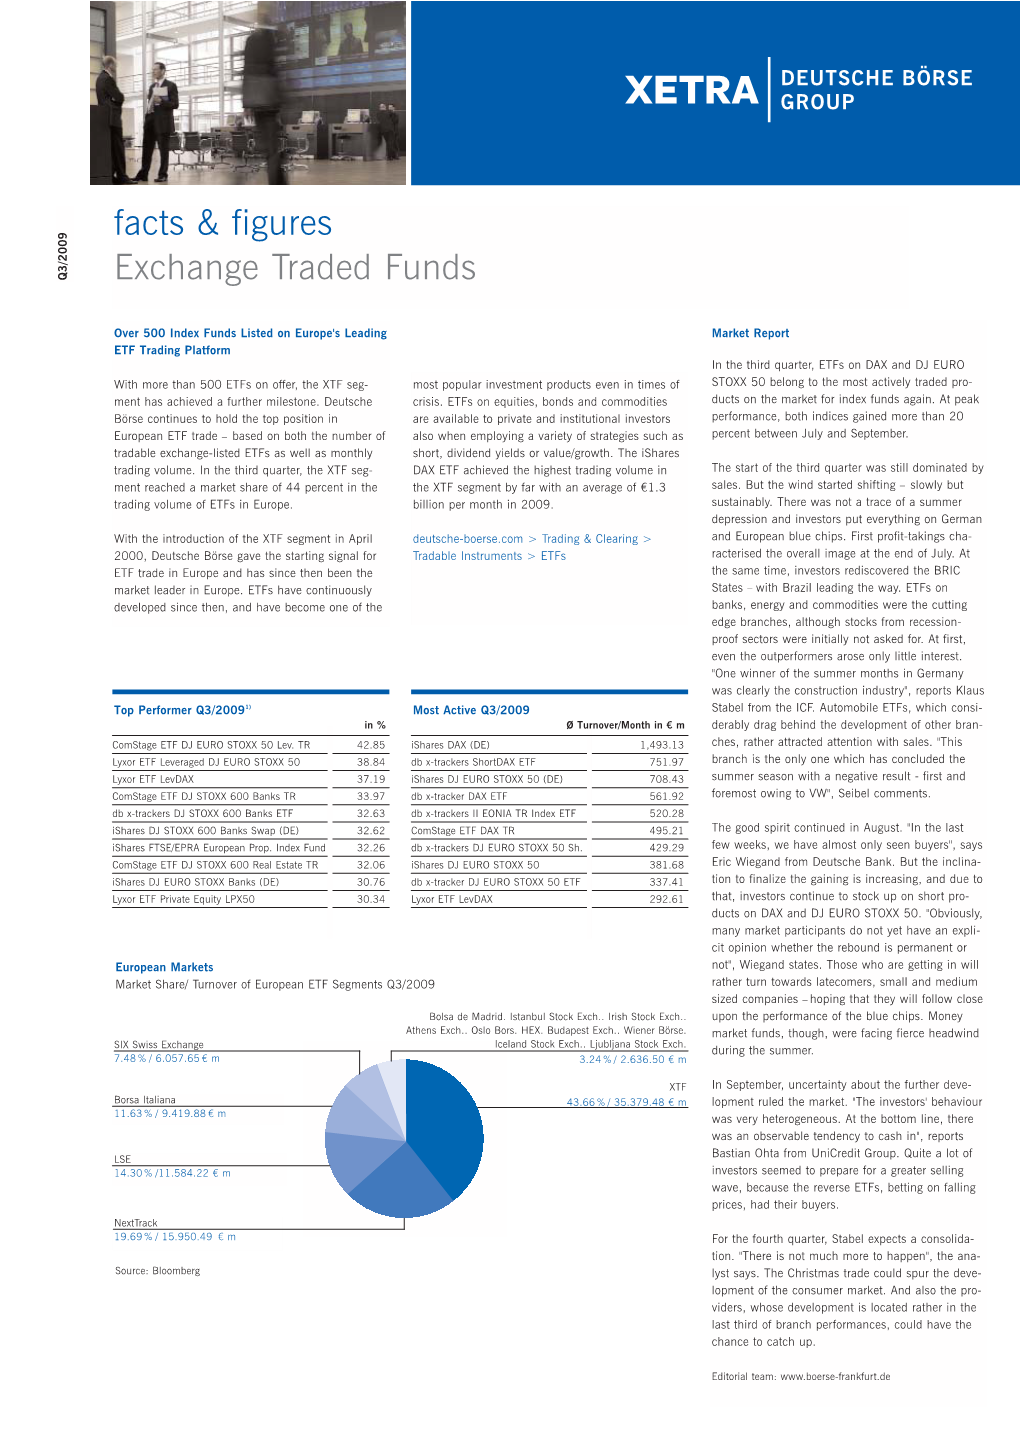 Facts & Figures Exchange Traded Funds